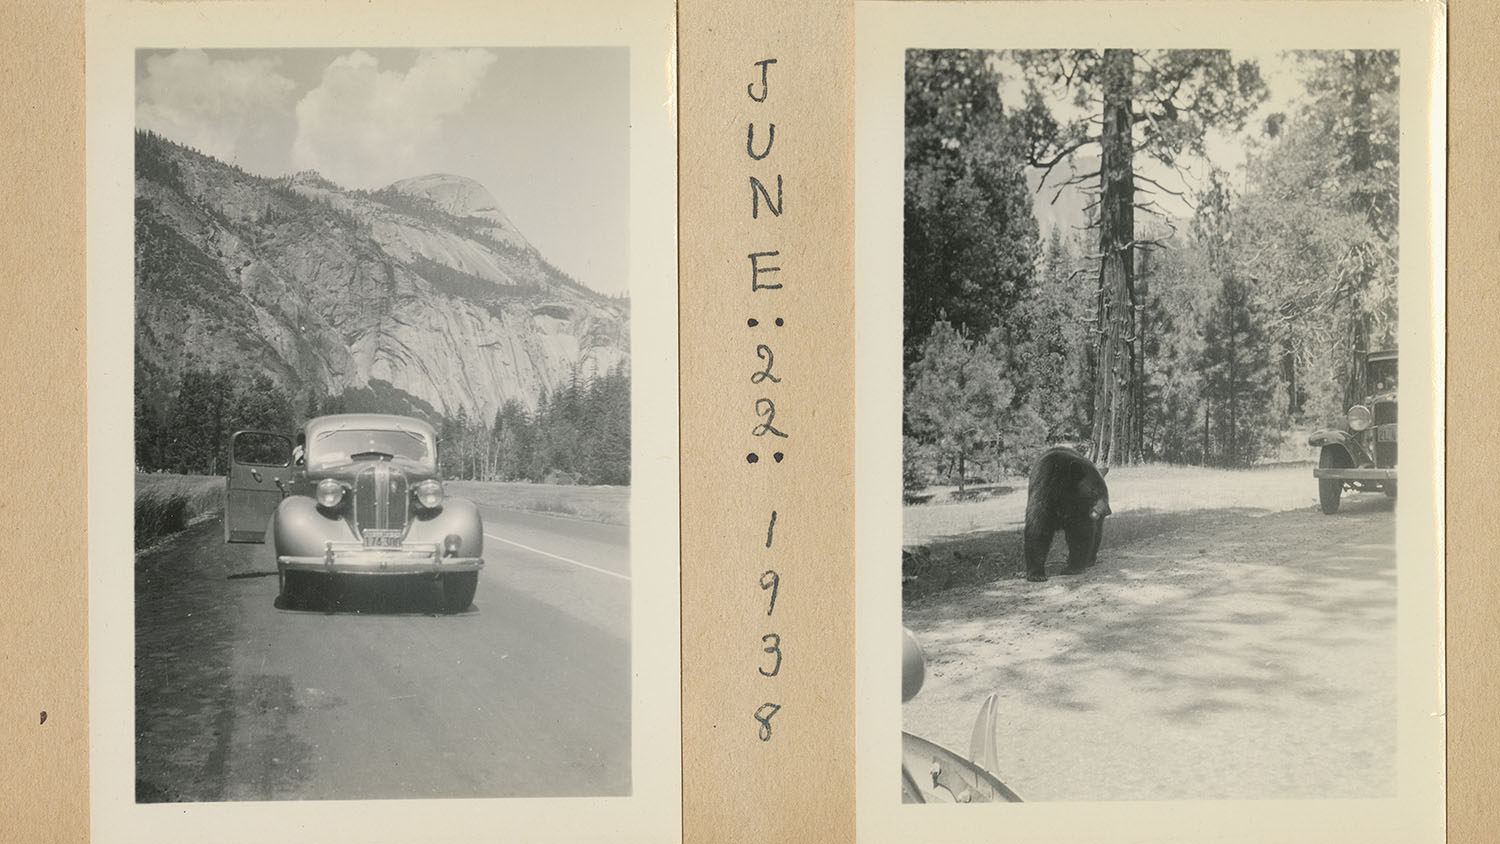 Two images (left picture: a car on the road; right picture a scene from the road) captioned June 22, 1938. MC318: 40